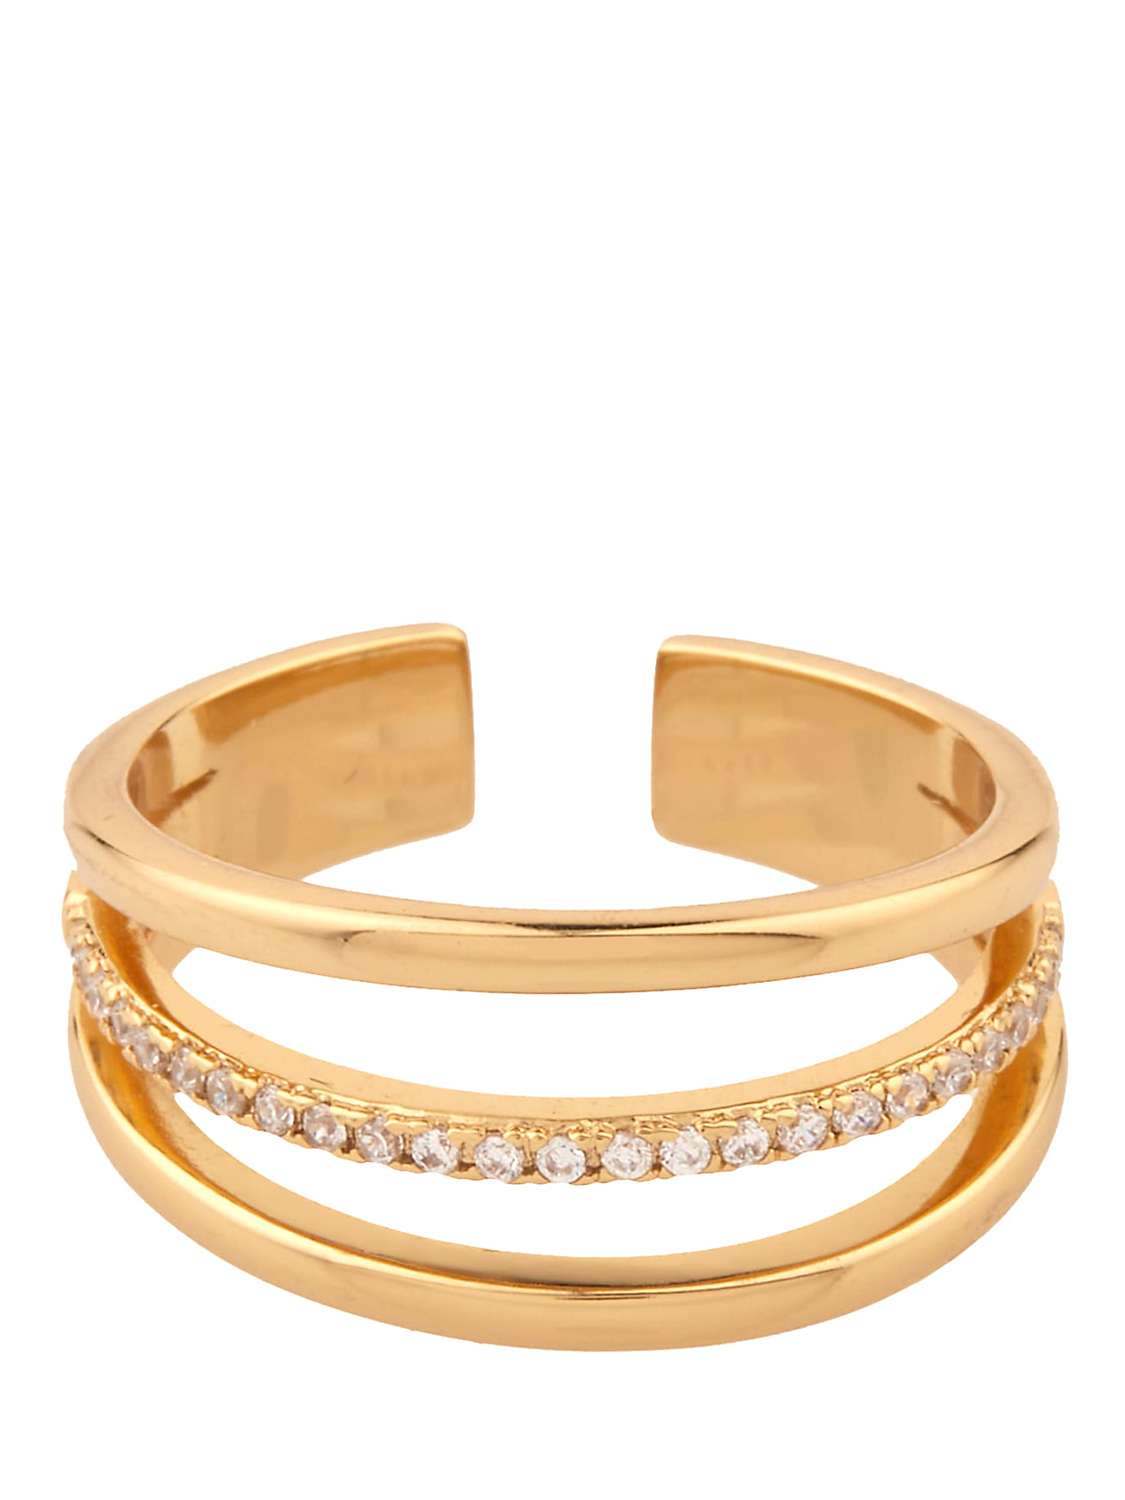 Buy Mint Velvet Plated Triple Claw Pave Ring Online at johnlewis.com